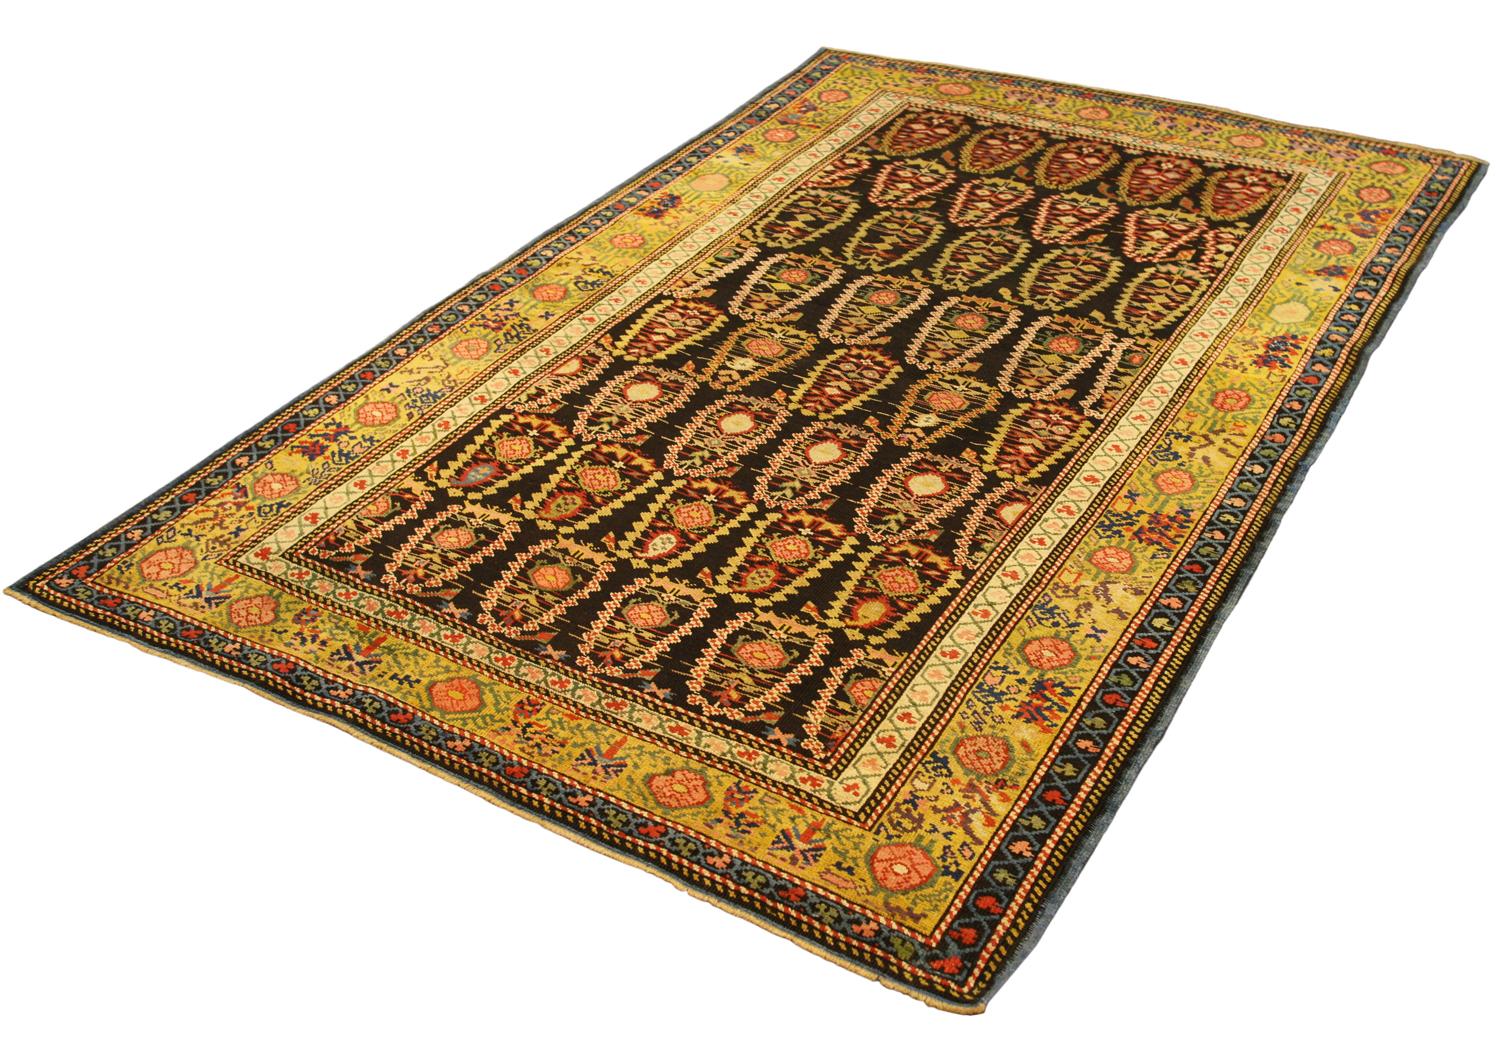 Hand-Knotted Antique Caucasian Olive Green Border Wool Seychour 'Zeikhur' Rug, 1880-1900 For Sale